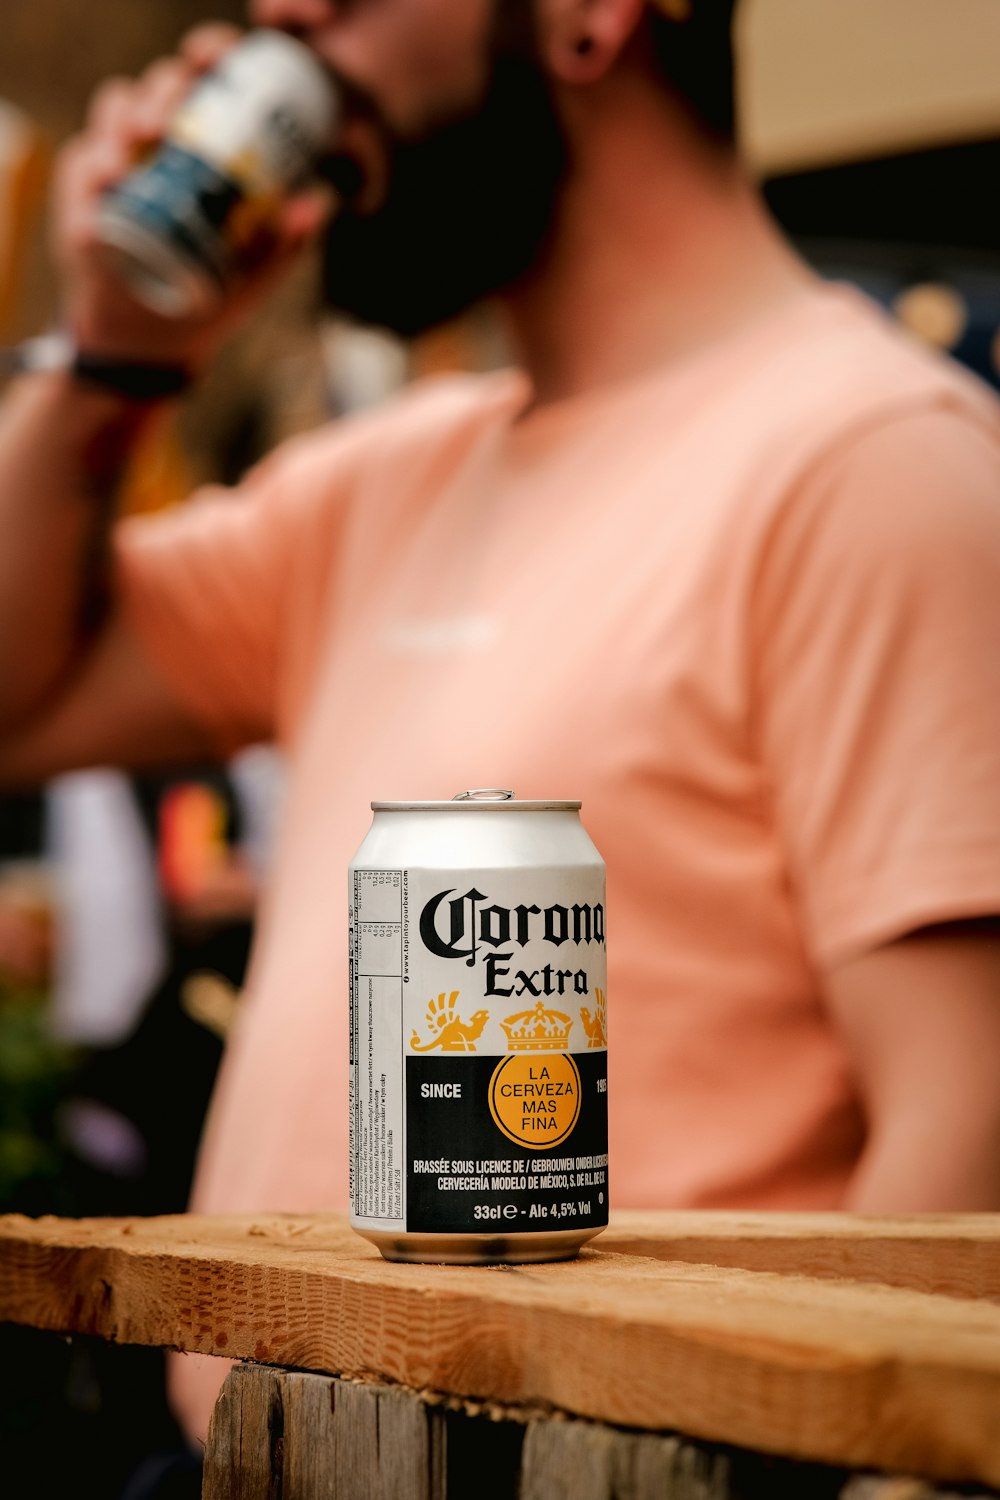 a man drinking a corona beer from a can